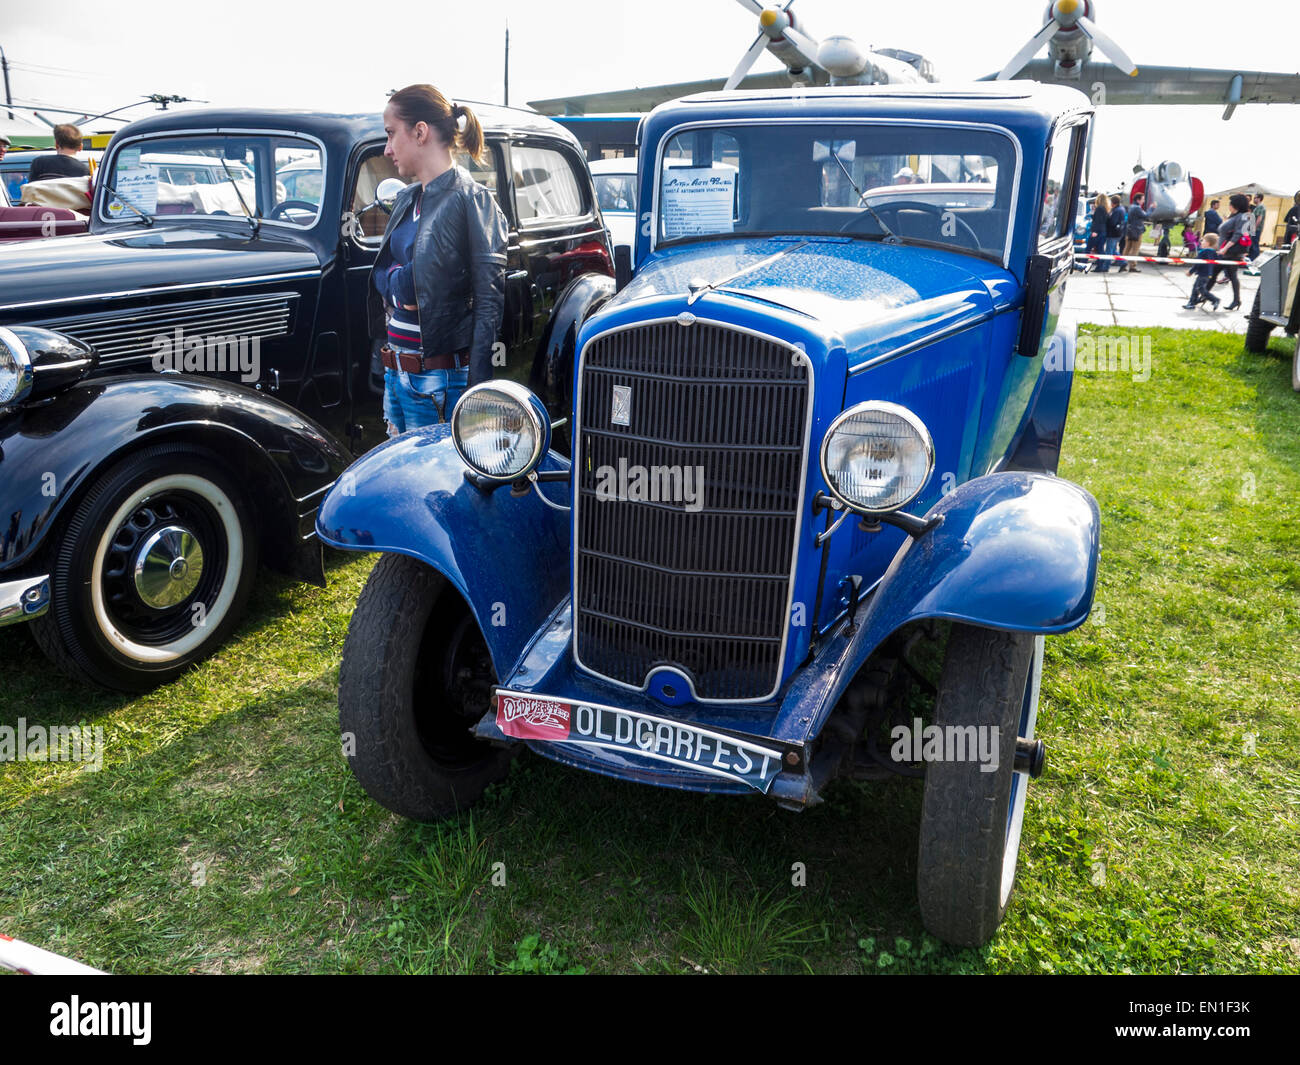 Opel, 1937 -- The Retro OldCarFest is the biggest retro cars festival held in Kiev, and covers the State Aviation Museum grounds. More than 300 cars are involved into this project and more than 20 thousand visitors are expected to attend. Stock Photo